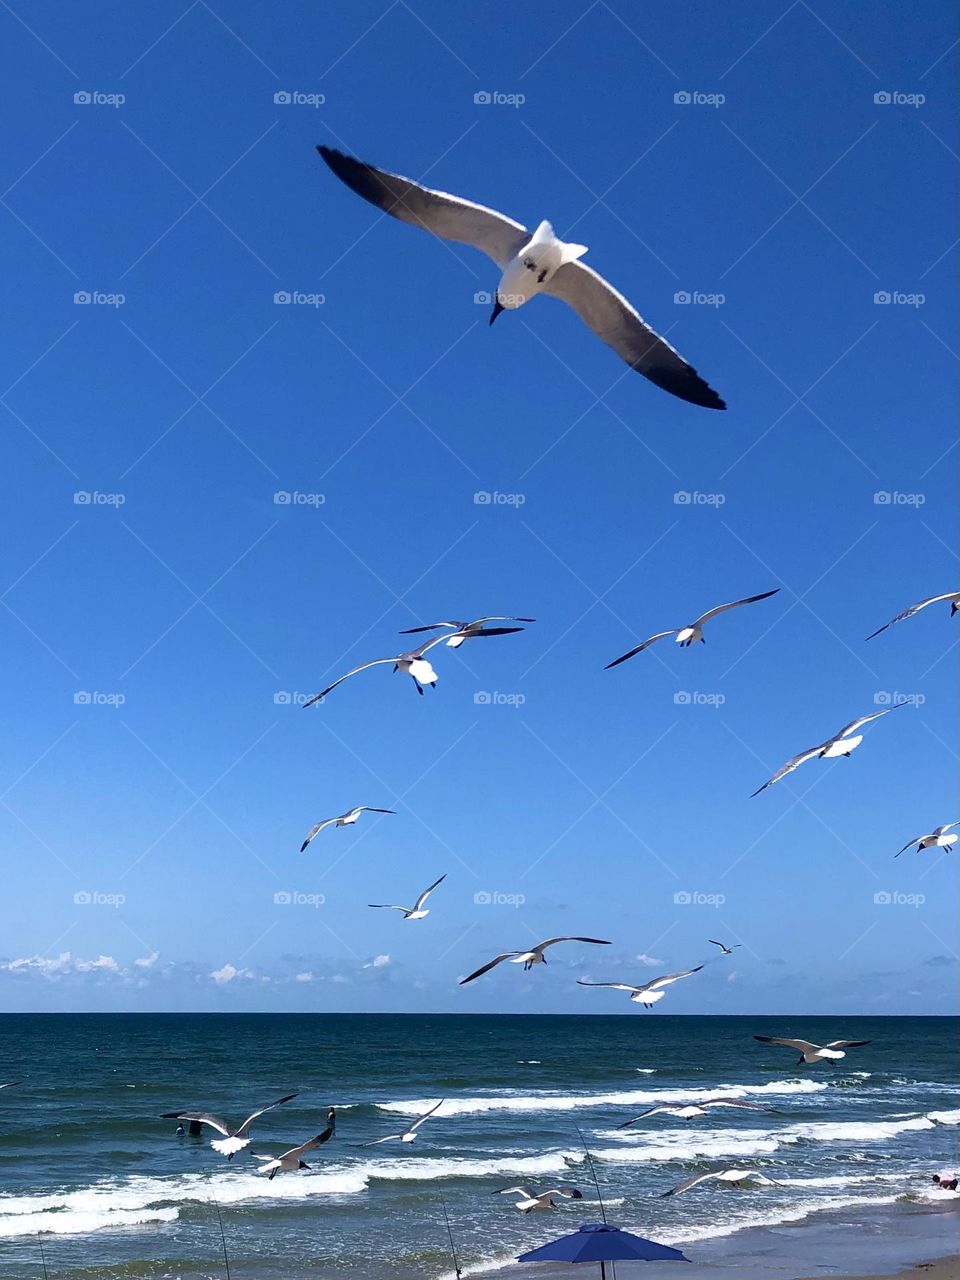 Seagulls flying over the sea wall in Galveston TX. This is the bluest you will see this water - it was gorgeous for Galveston!!